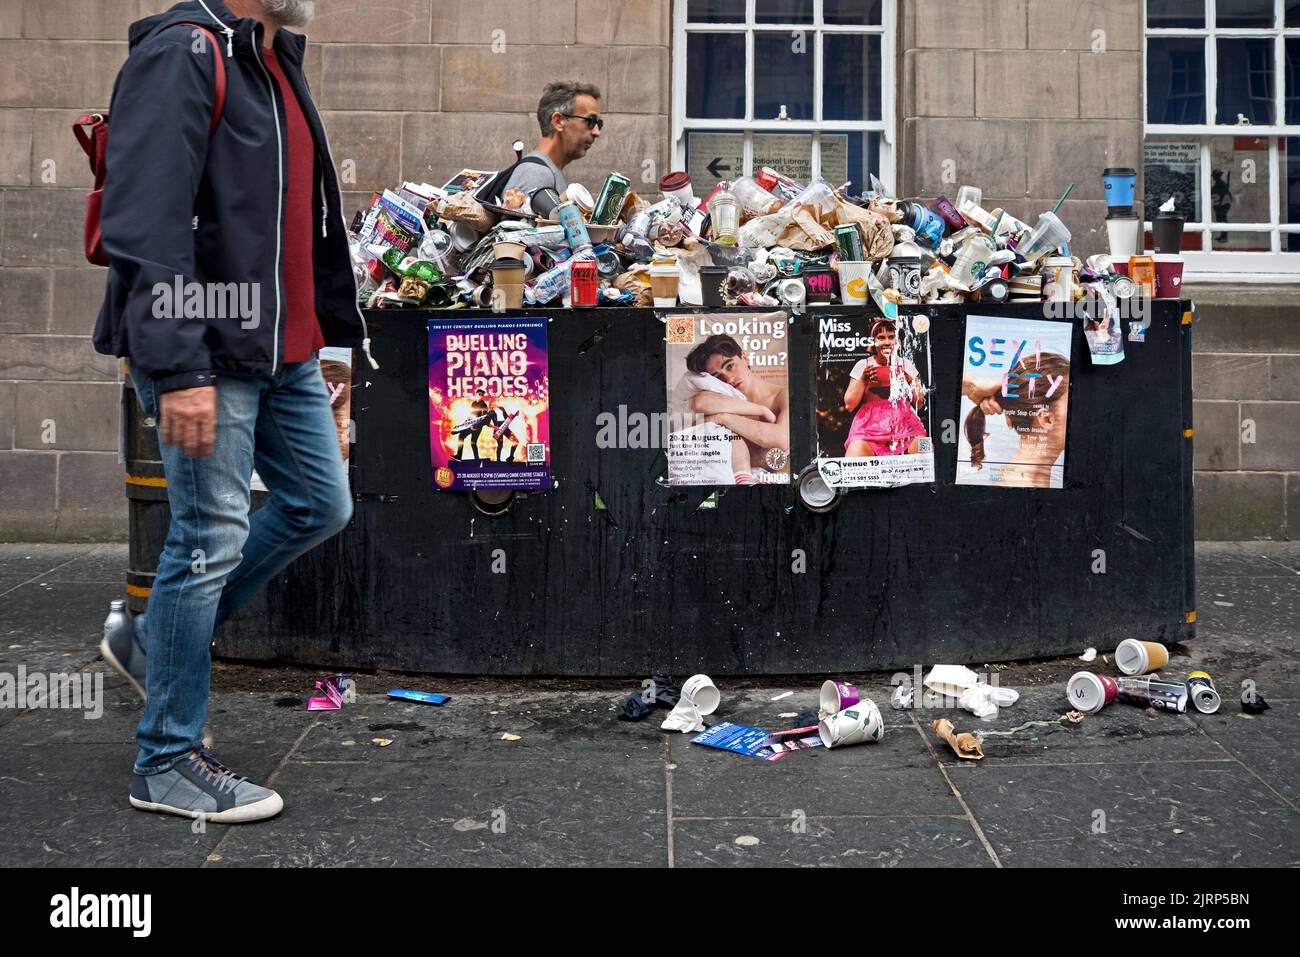 Litter in the Lawnmarket during the Edinburgh Fringe due to industrial action by Edinburgh council workers. Edinburgh, Scotland, UK. Stock Photo